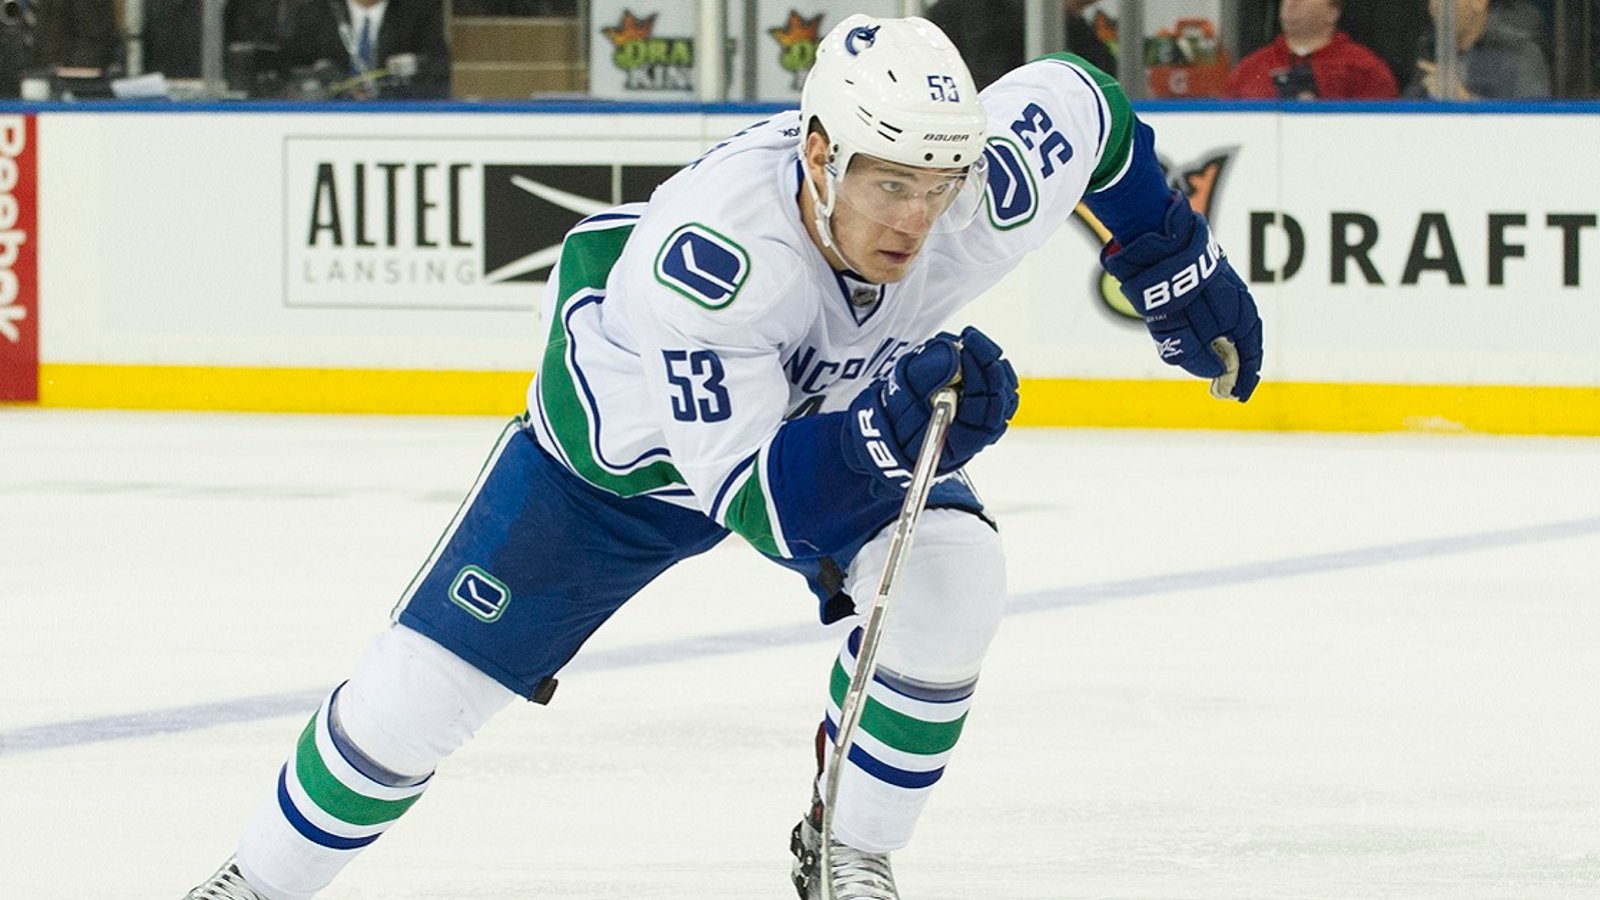 Breaking: Canucks working on a long-term deal with young forward.